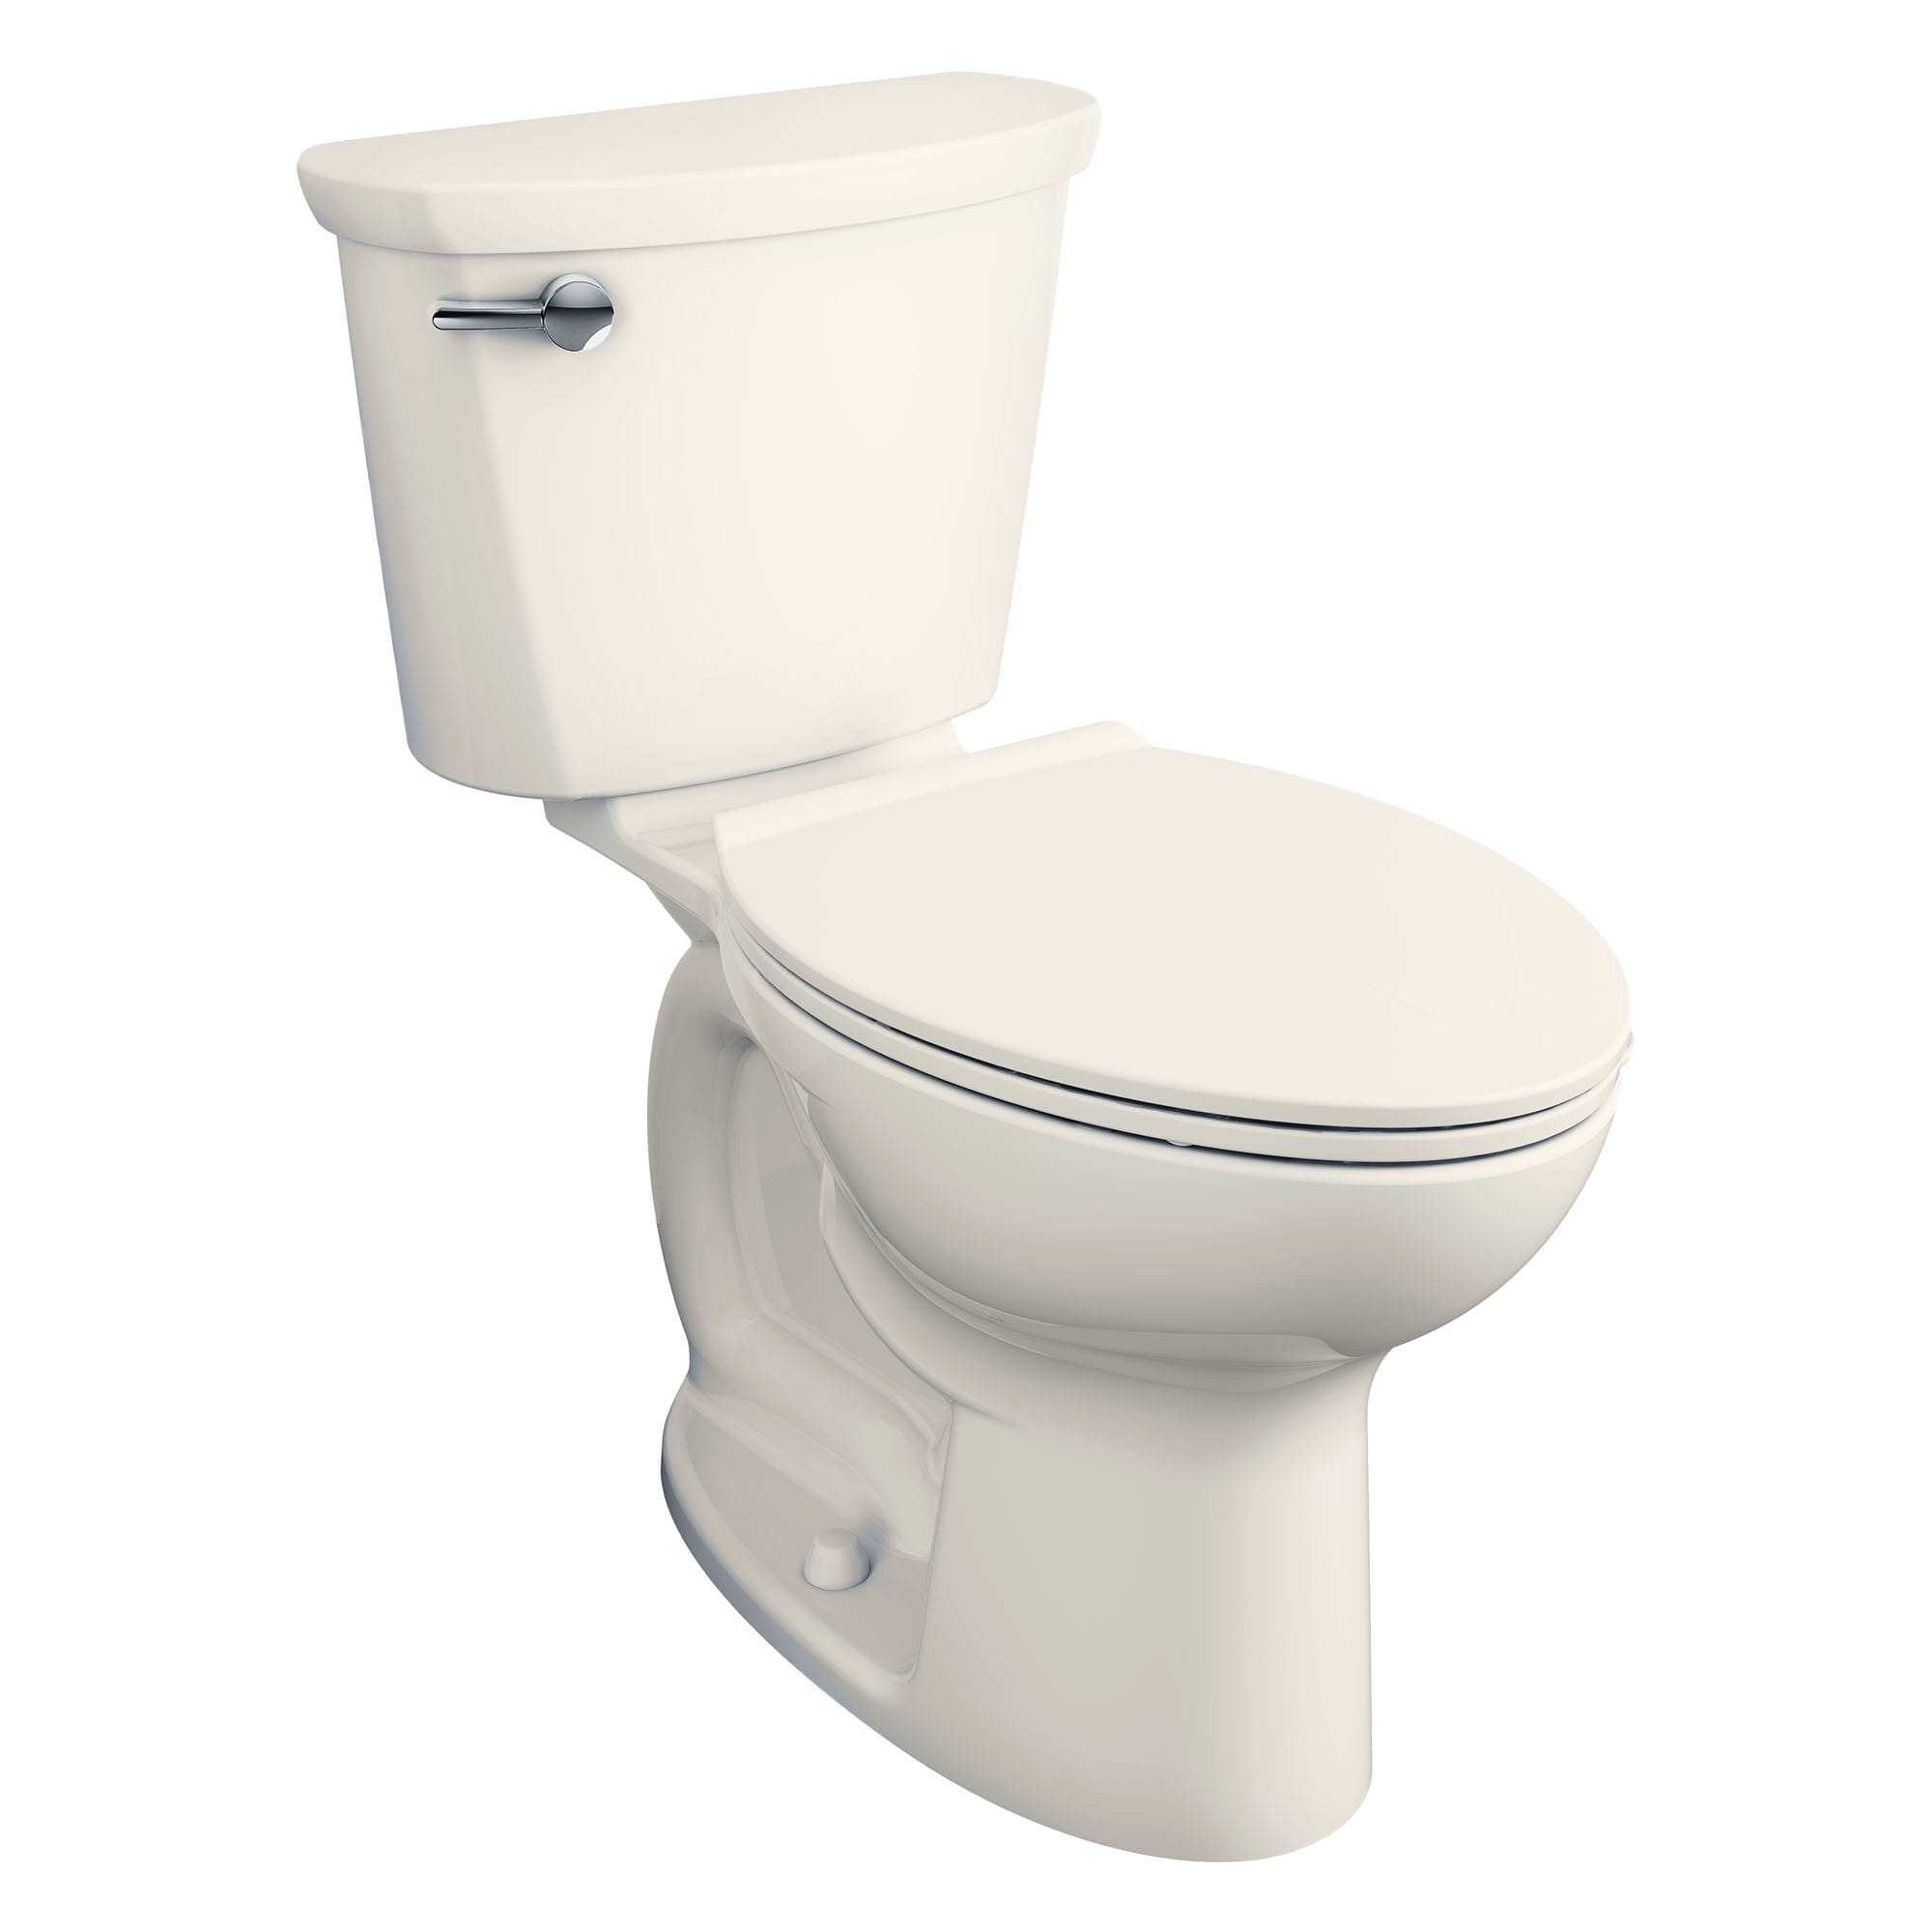 Cadet® PRO Two-Piece 1.6 gpf/6.0 Lpf Compact Chair Height Elongated Toilet Less Seat